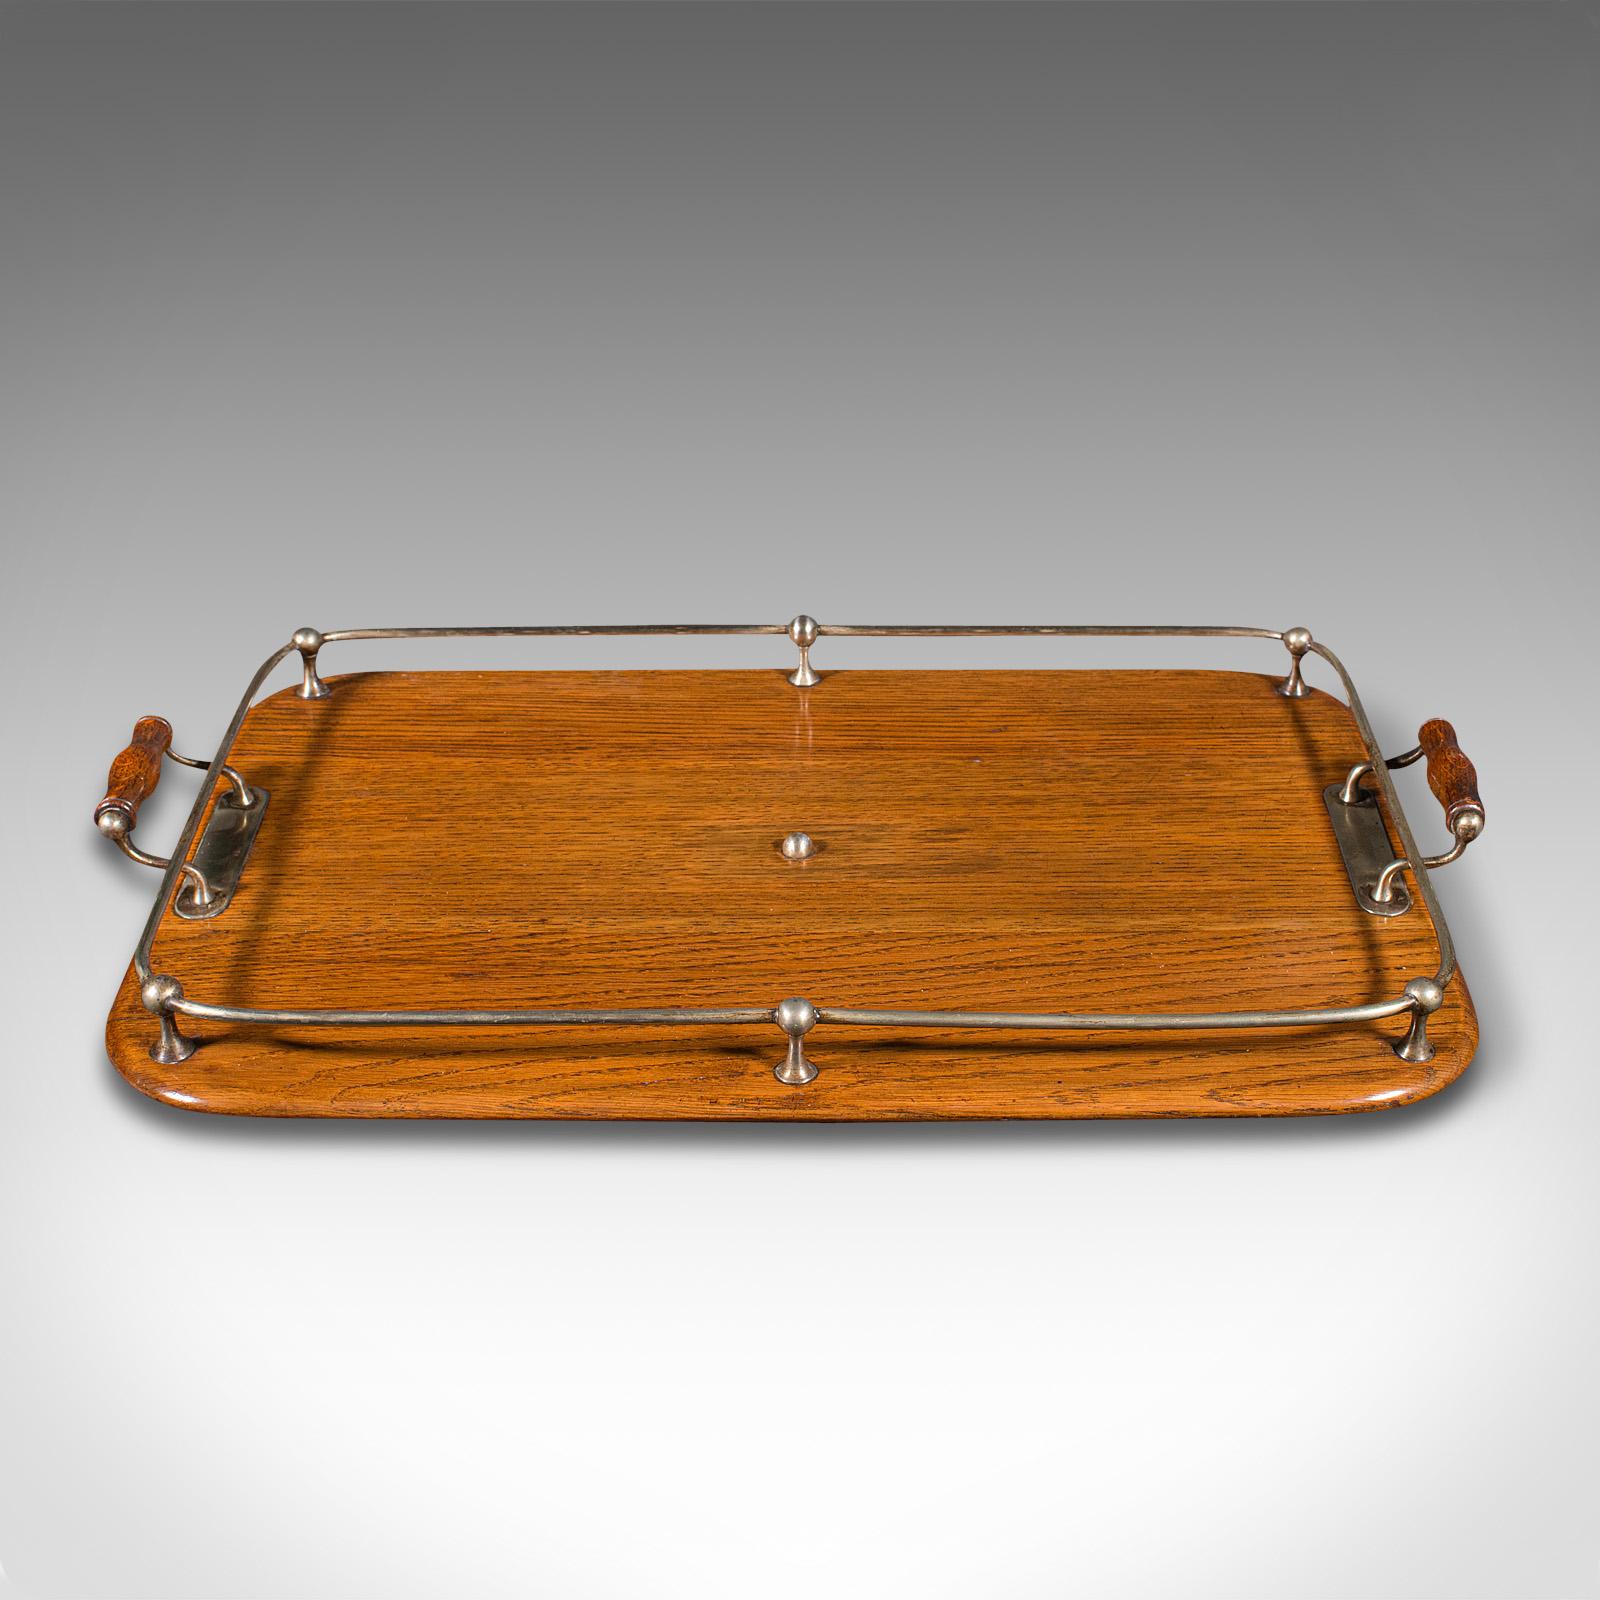 This is an antique afternoon tea tray. An English, oak and cast metal serving platter, dating to the Edwardian period, circa 1910.

Attractive serving tray with fine finish and colour
Displays a desirable aged patina and in good order
Select oak